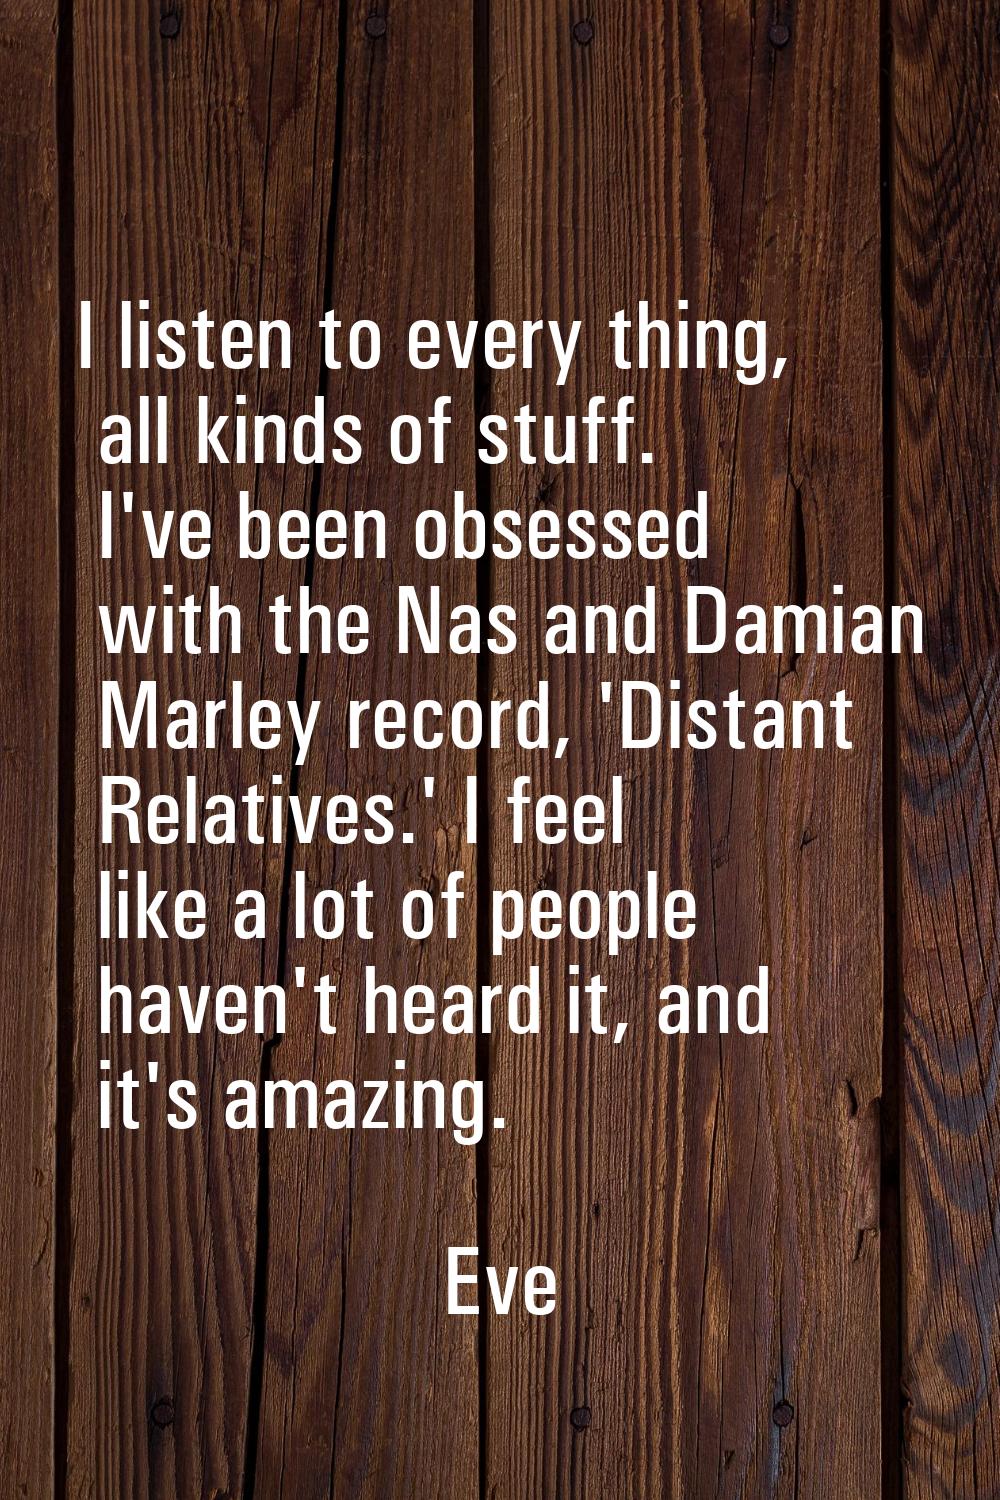 I listen to every thing, all kinds of stuff. I've been obsessed with the Nas and Damian Marley reco